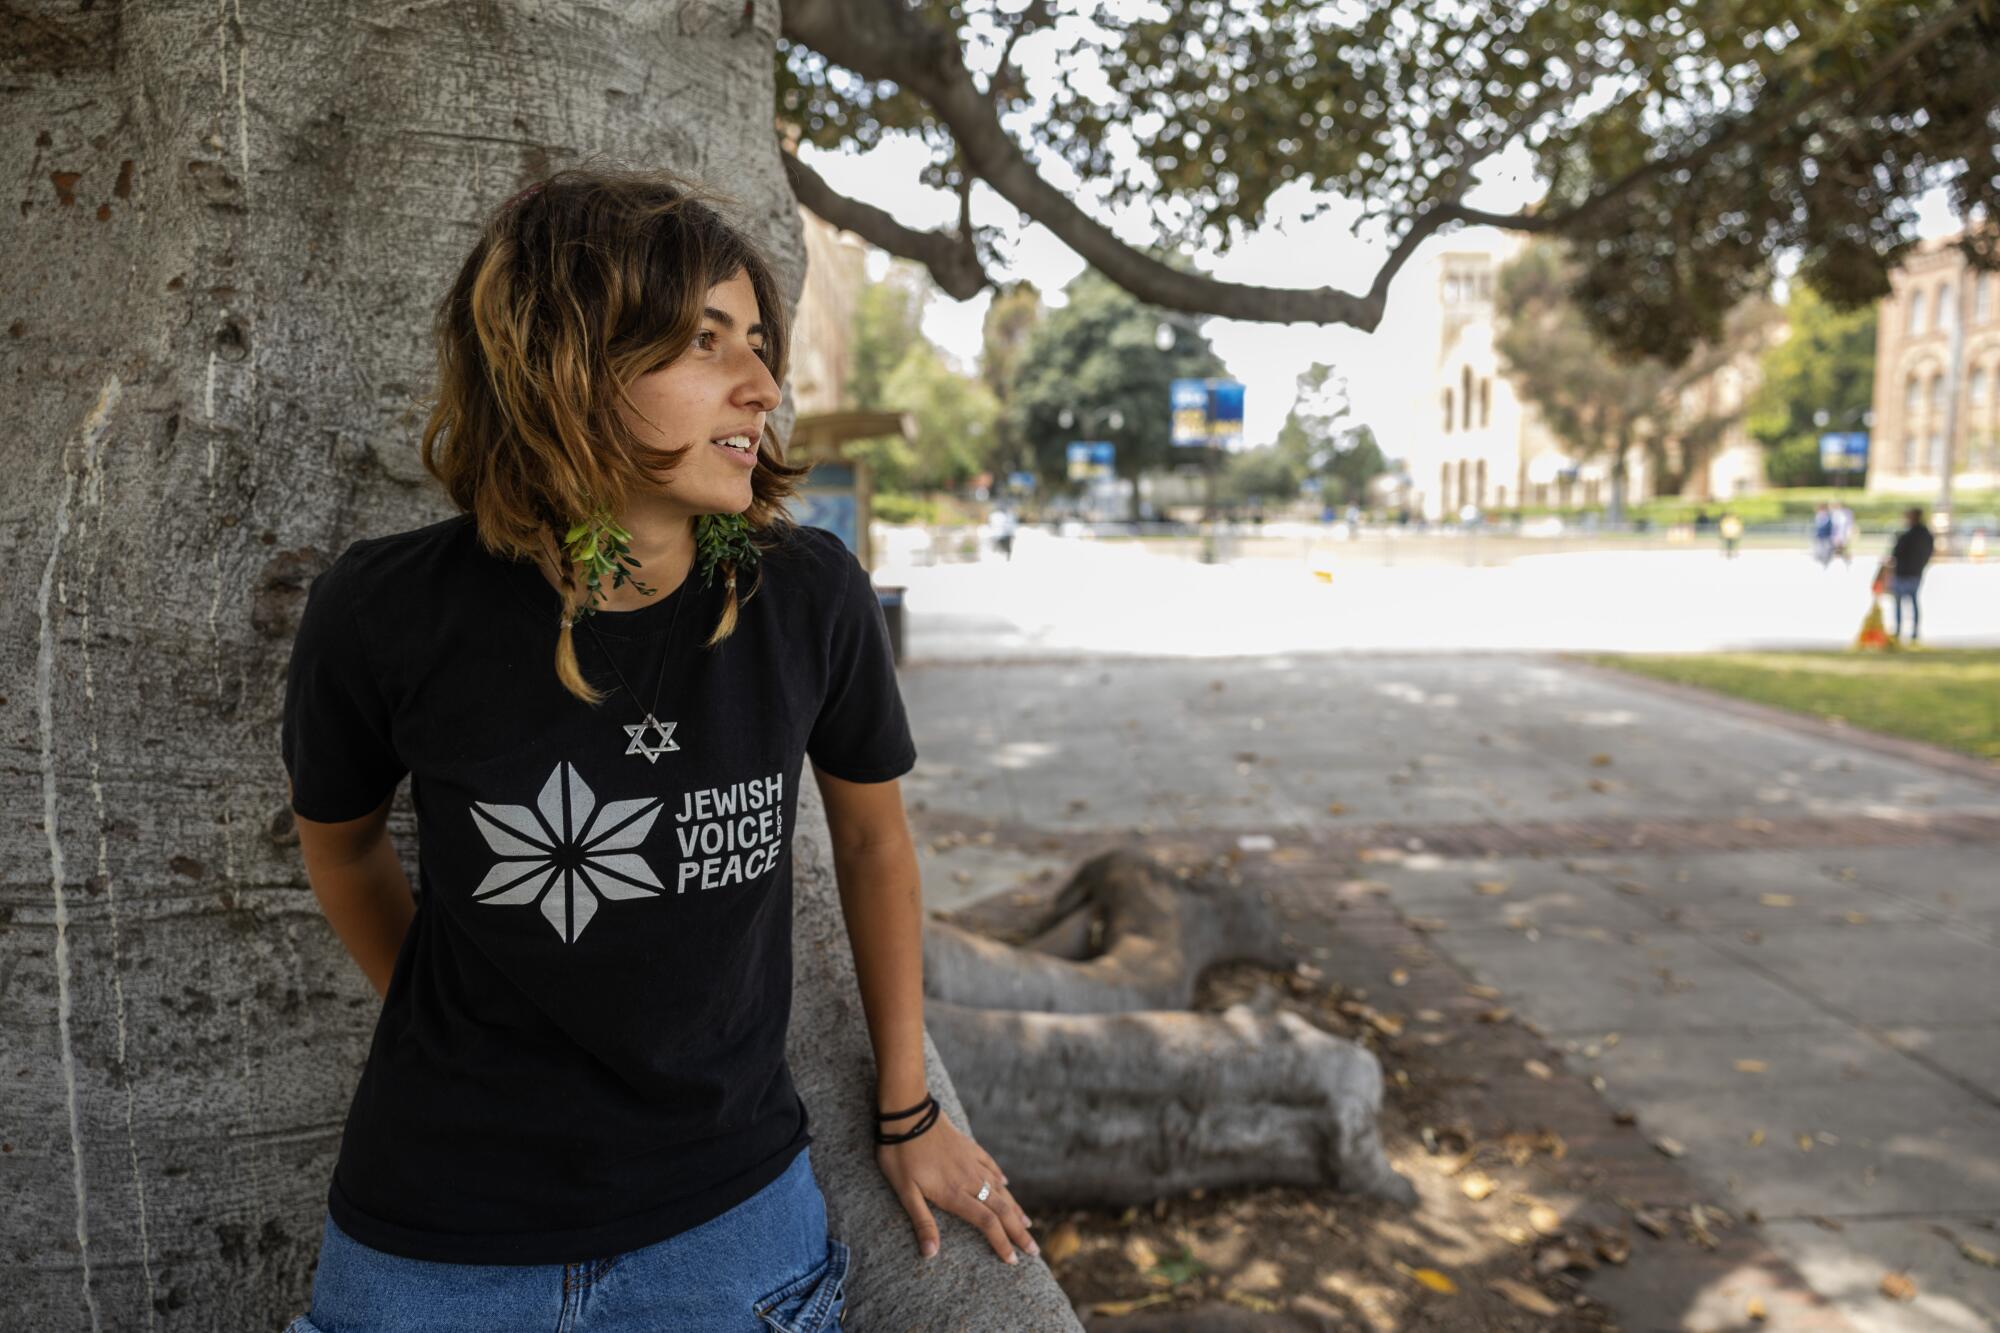 UCLA student Sabrina Ellis wearing a Star of David necklace and a shirt reading "Jewish Voice for Peace"